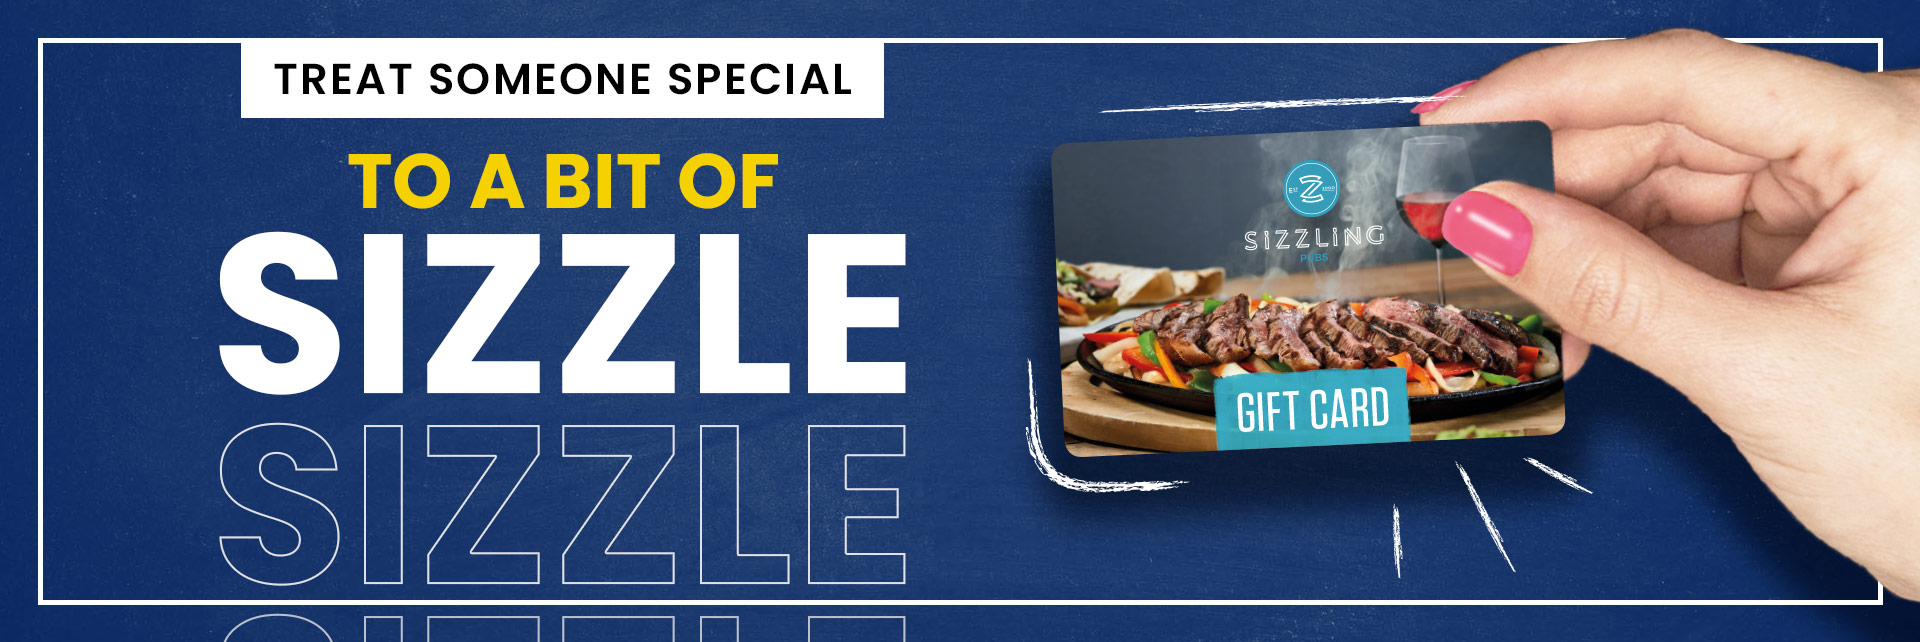 Sizzling Pubs Gift Card at The Packhorse in Wythall